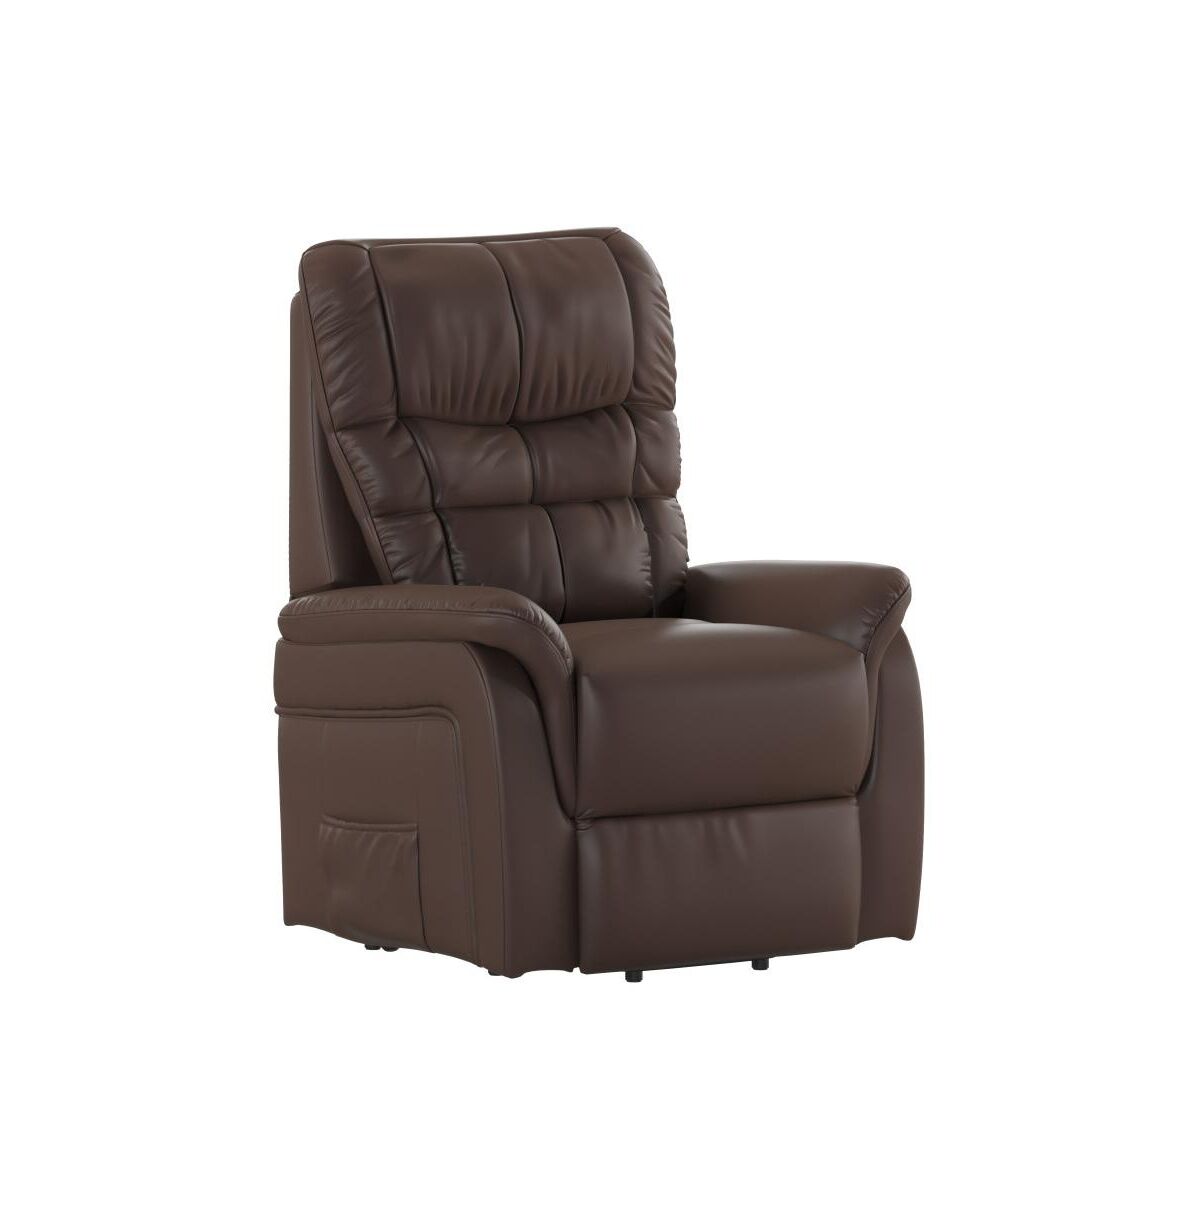 Emma+oliver Electric Remote Powered Elderly Lift Recliner Chair - Cognac leathersoft